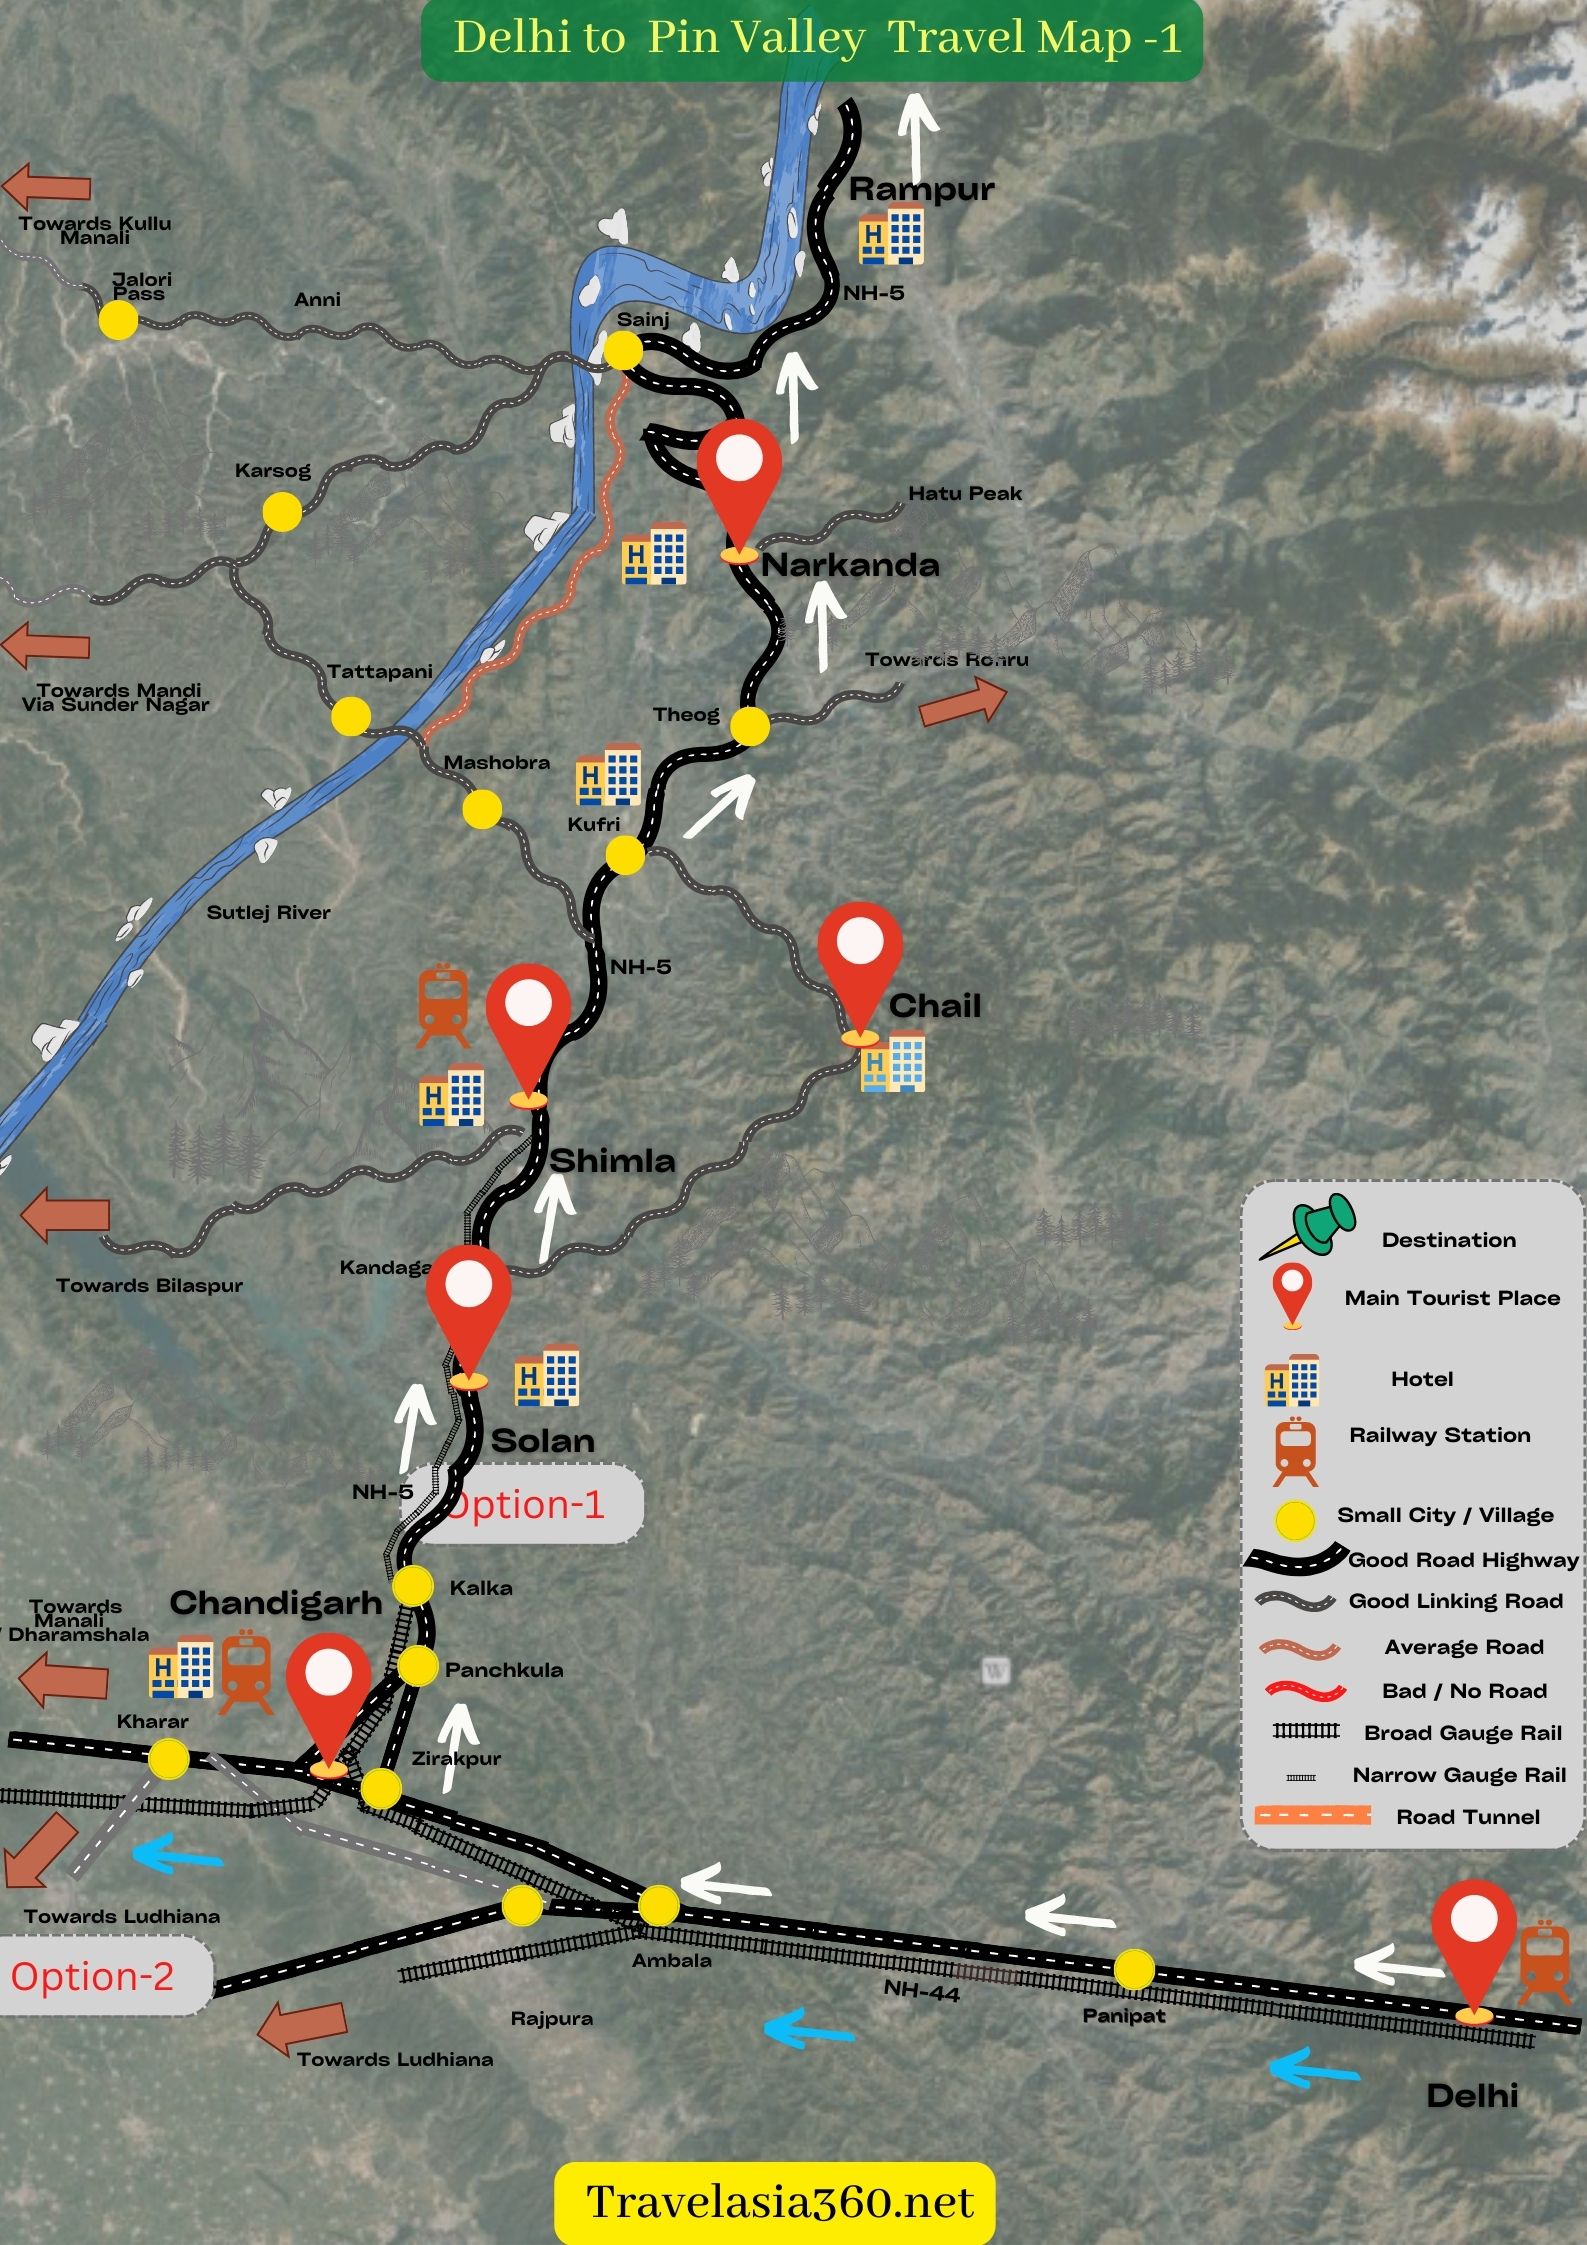 how to reach Mud Pin Valley from Delhi